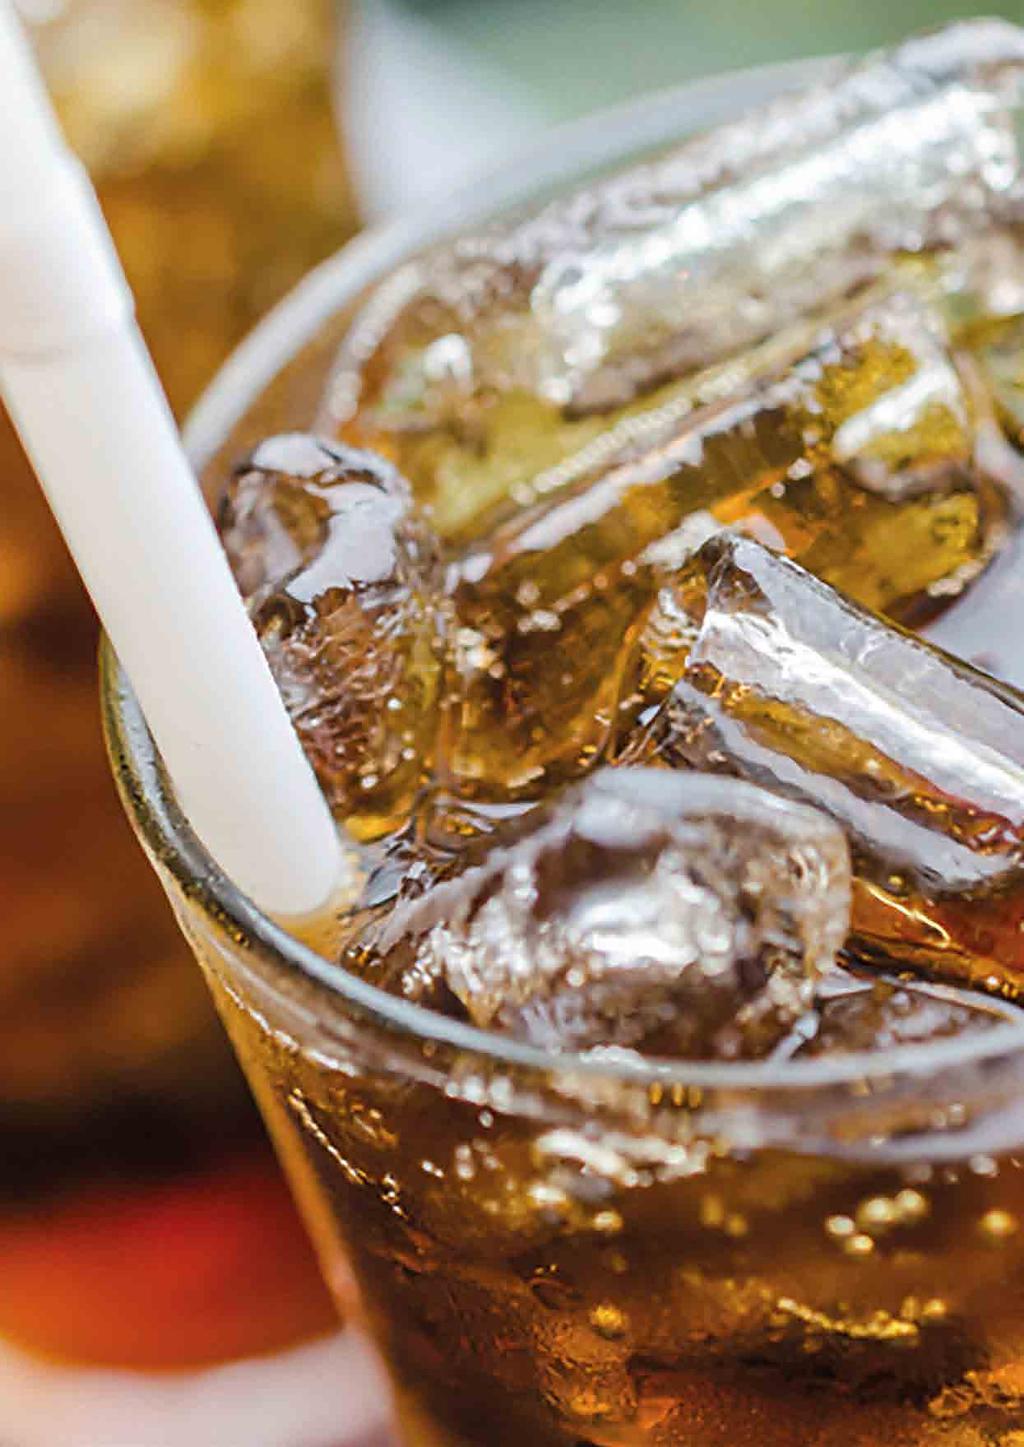 10 SOLUTIONS FOR NON-ALCOHOLIC BEVERAGE APPLICATIONS Soft drinks can be either carbonated or non-carbonated; cola and non-cola carbonates are naturally and/or